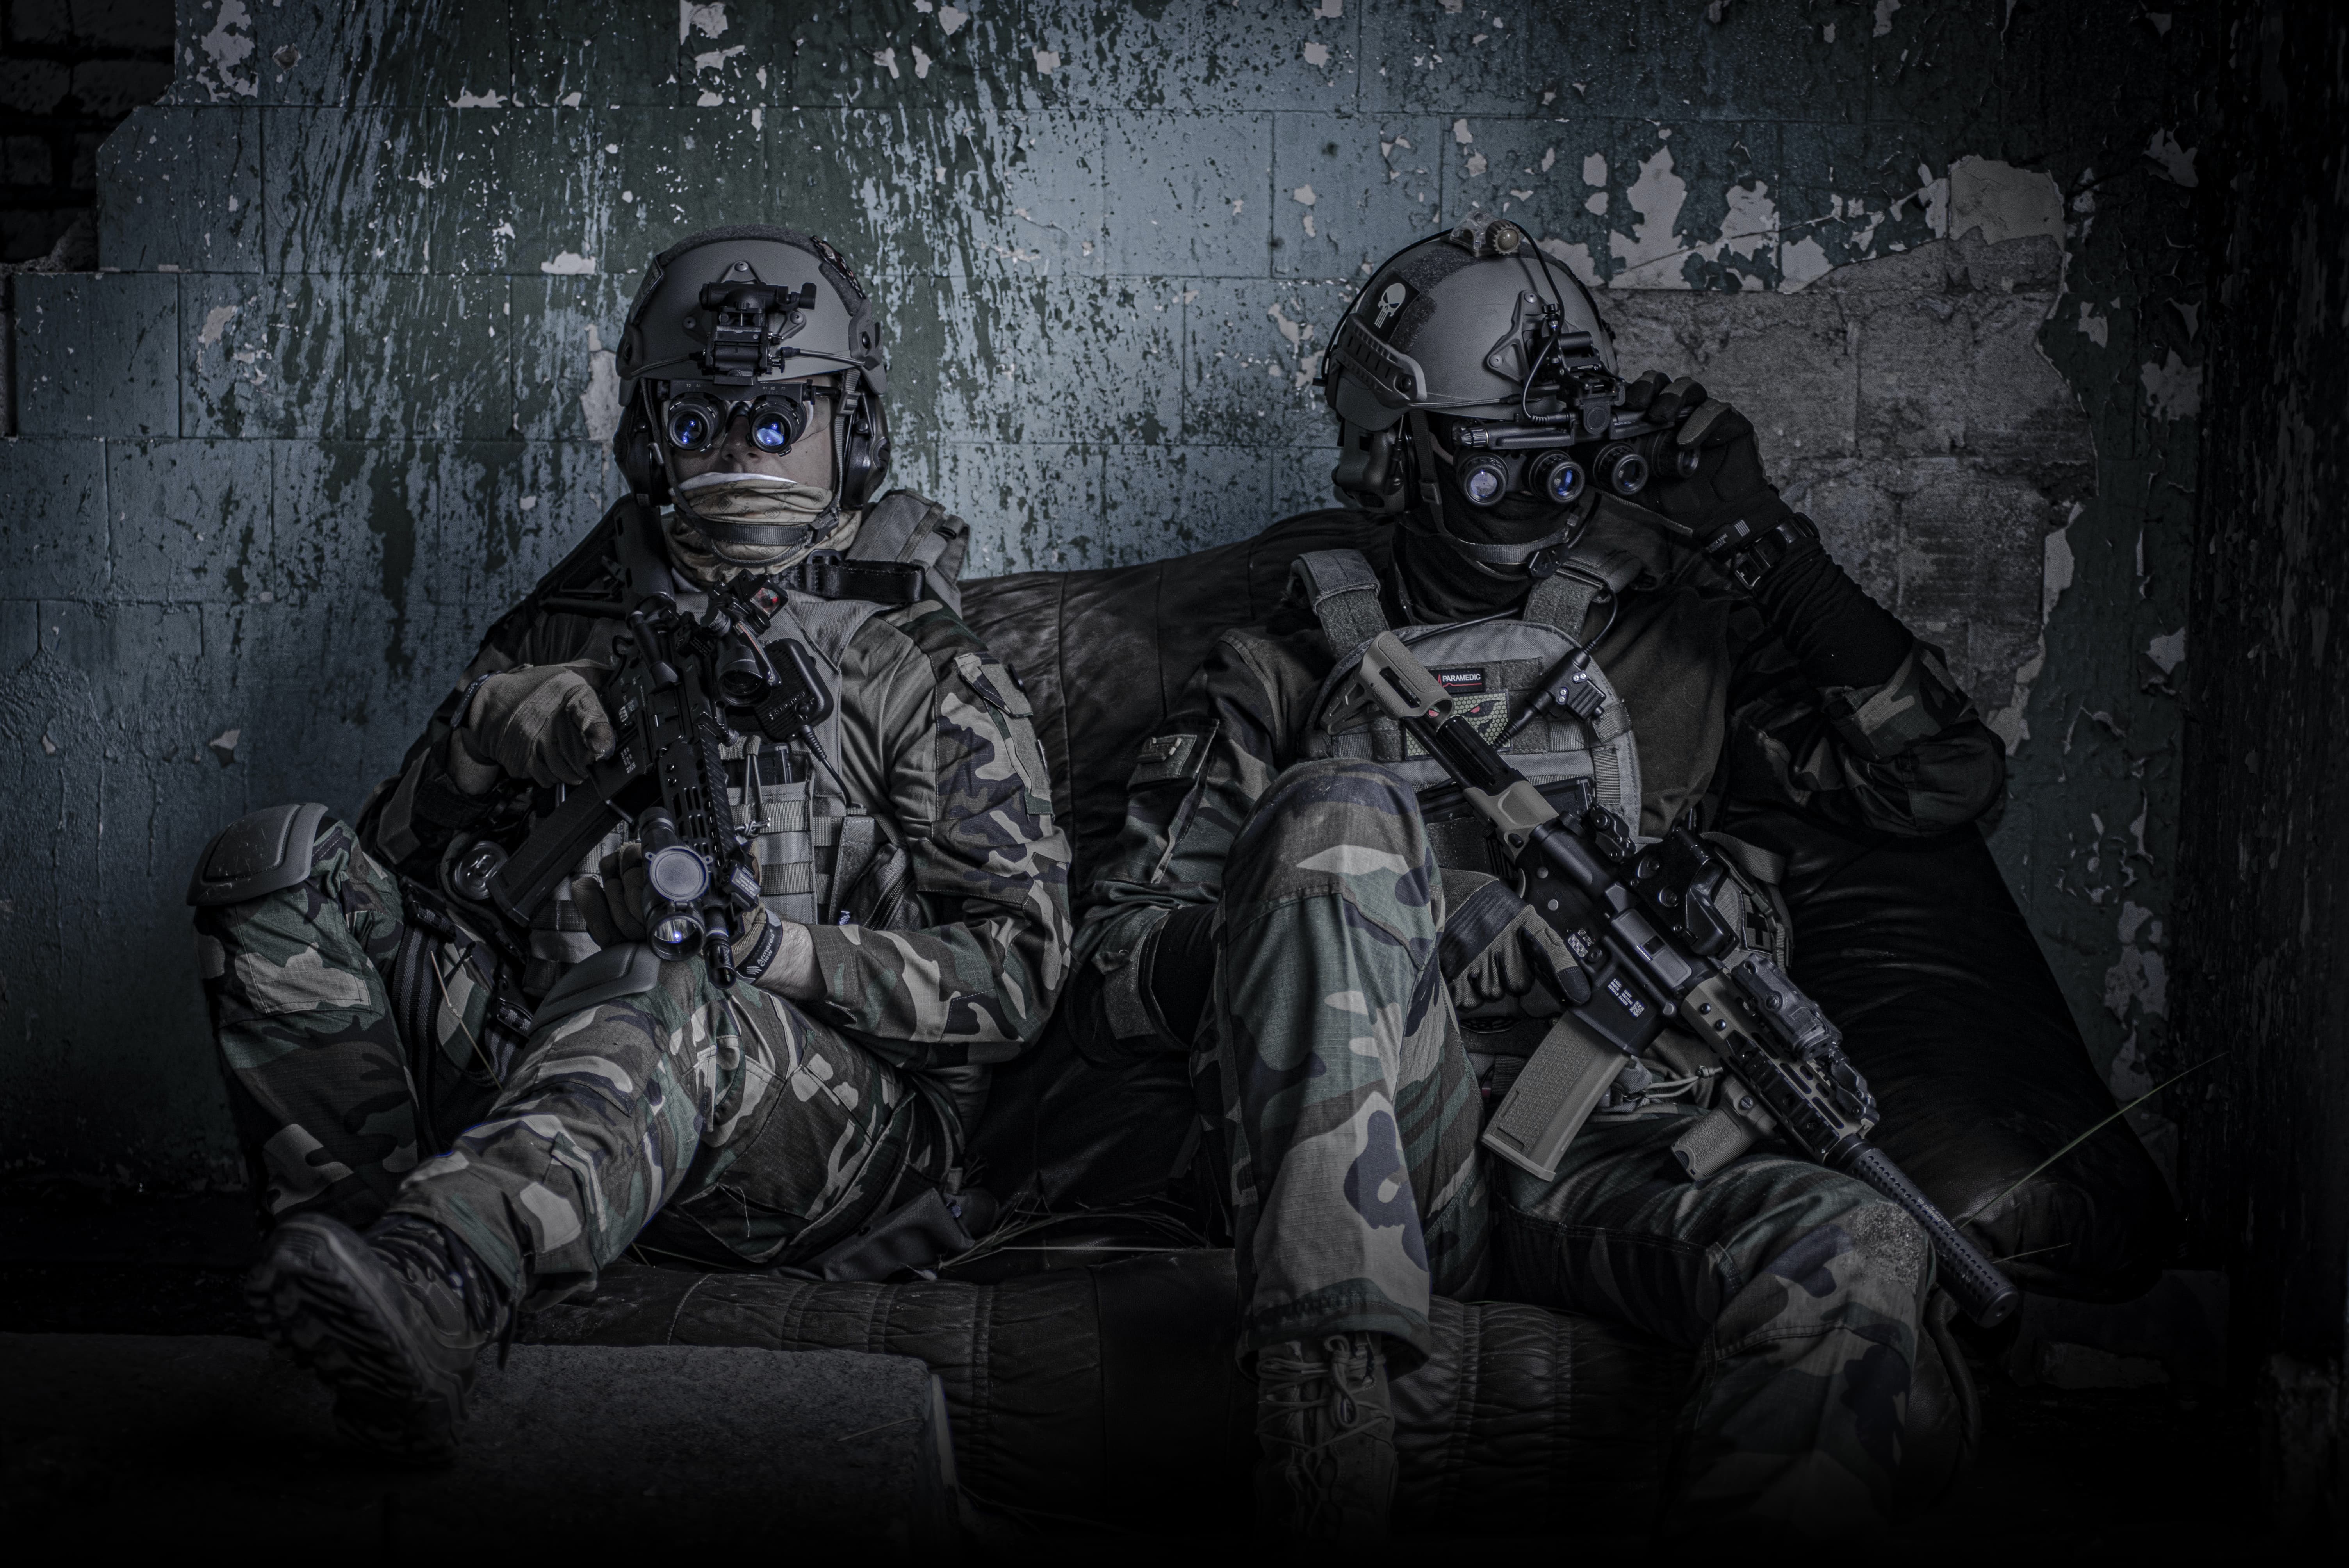 specna arms night vision soldiers